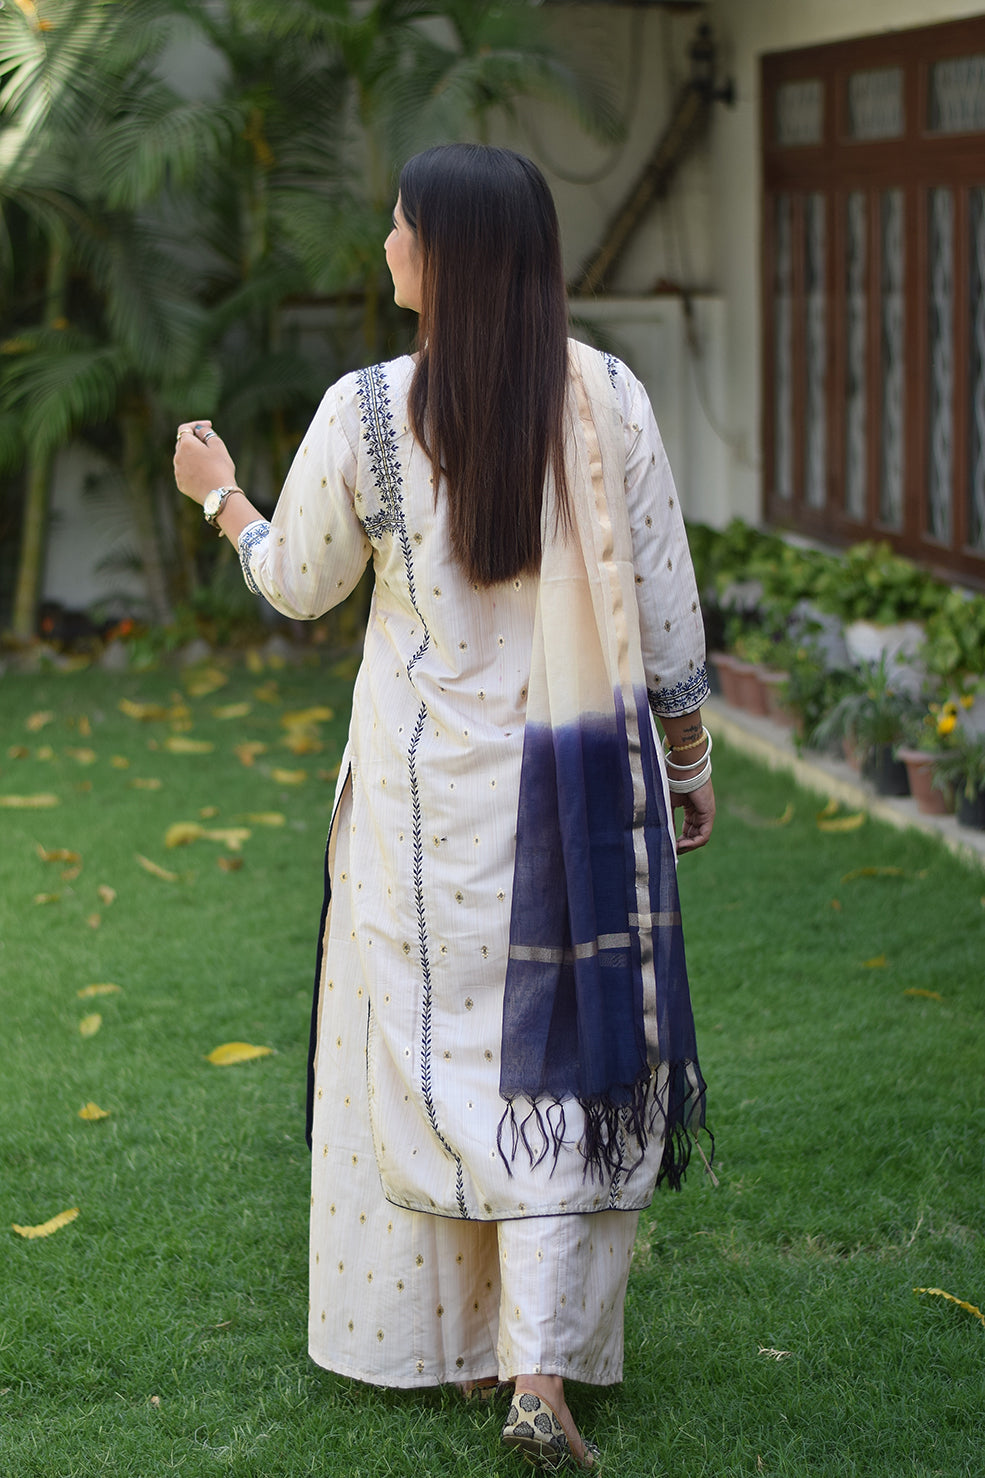 A fashionable Indian woman wearing an Off-White Silk Kurta with intricate embroidery.